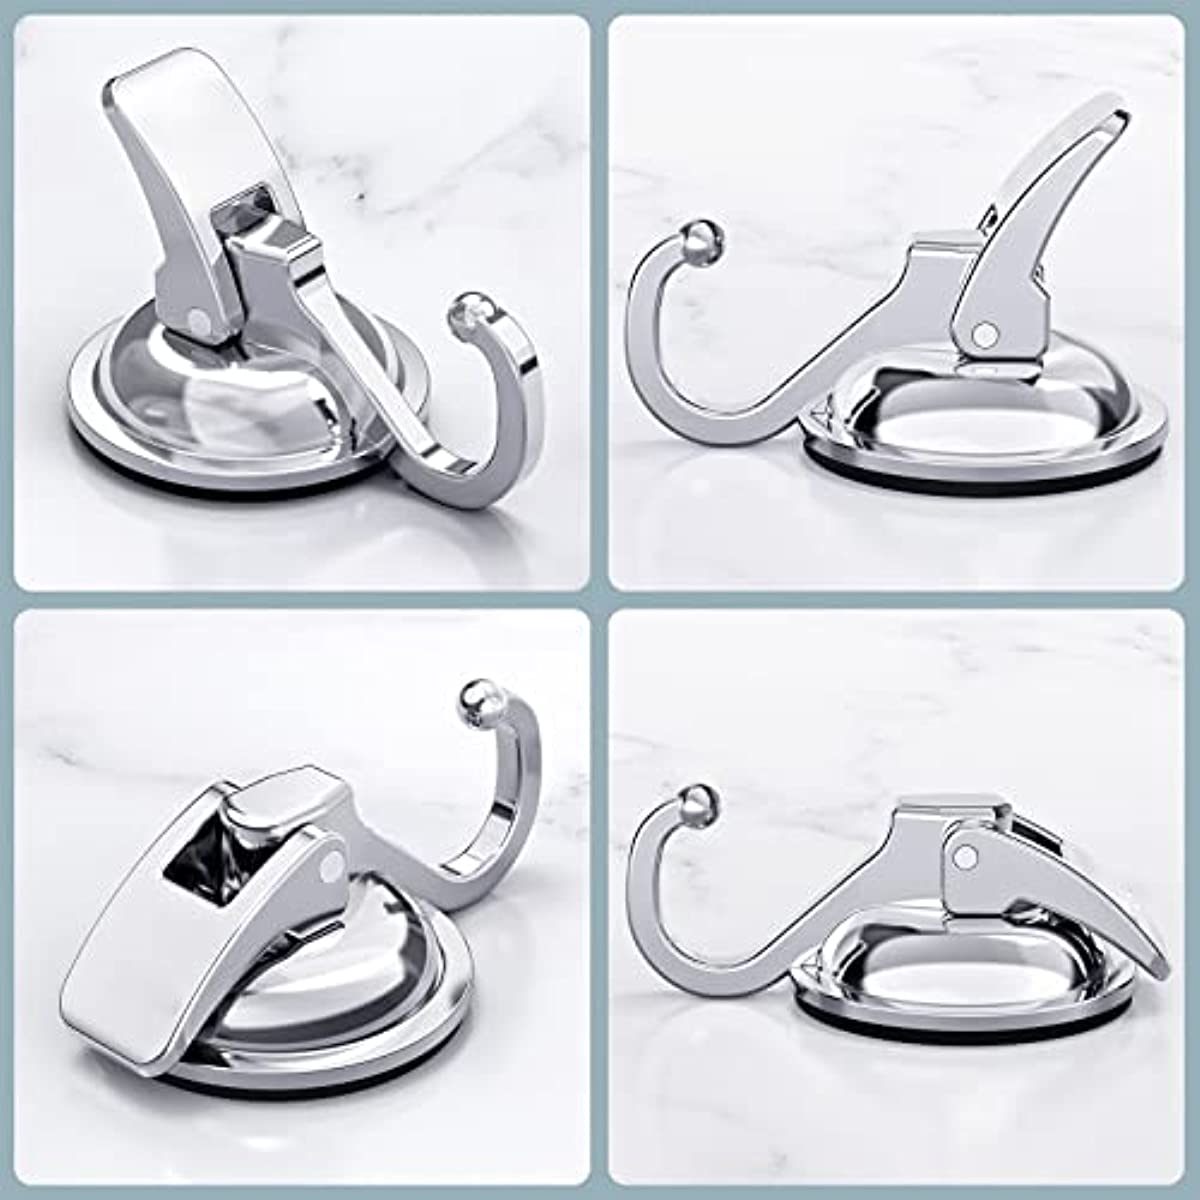 VIS'V Suction Cup Hooks, Small Clear Heavy Duty Vacuum Suction Hooks Shower  Wall Suction Cup